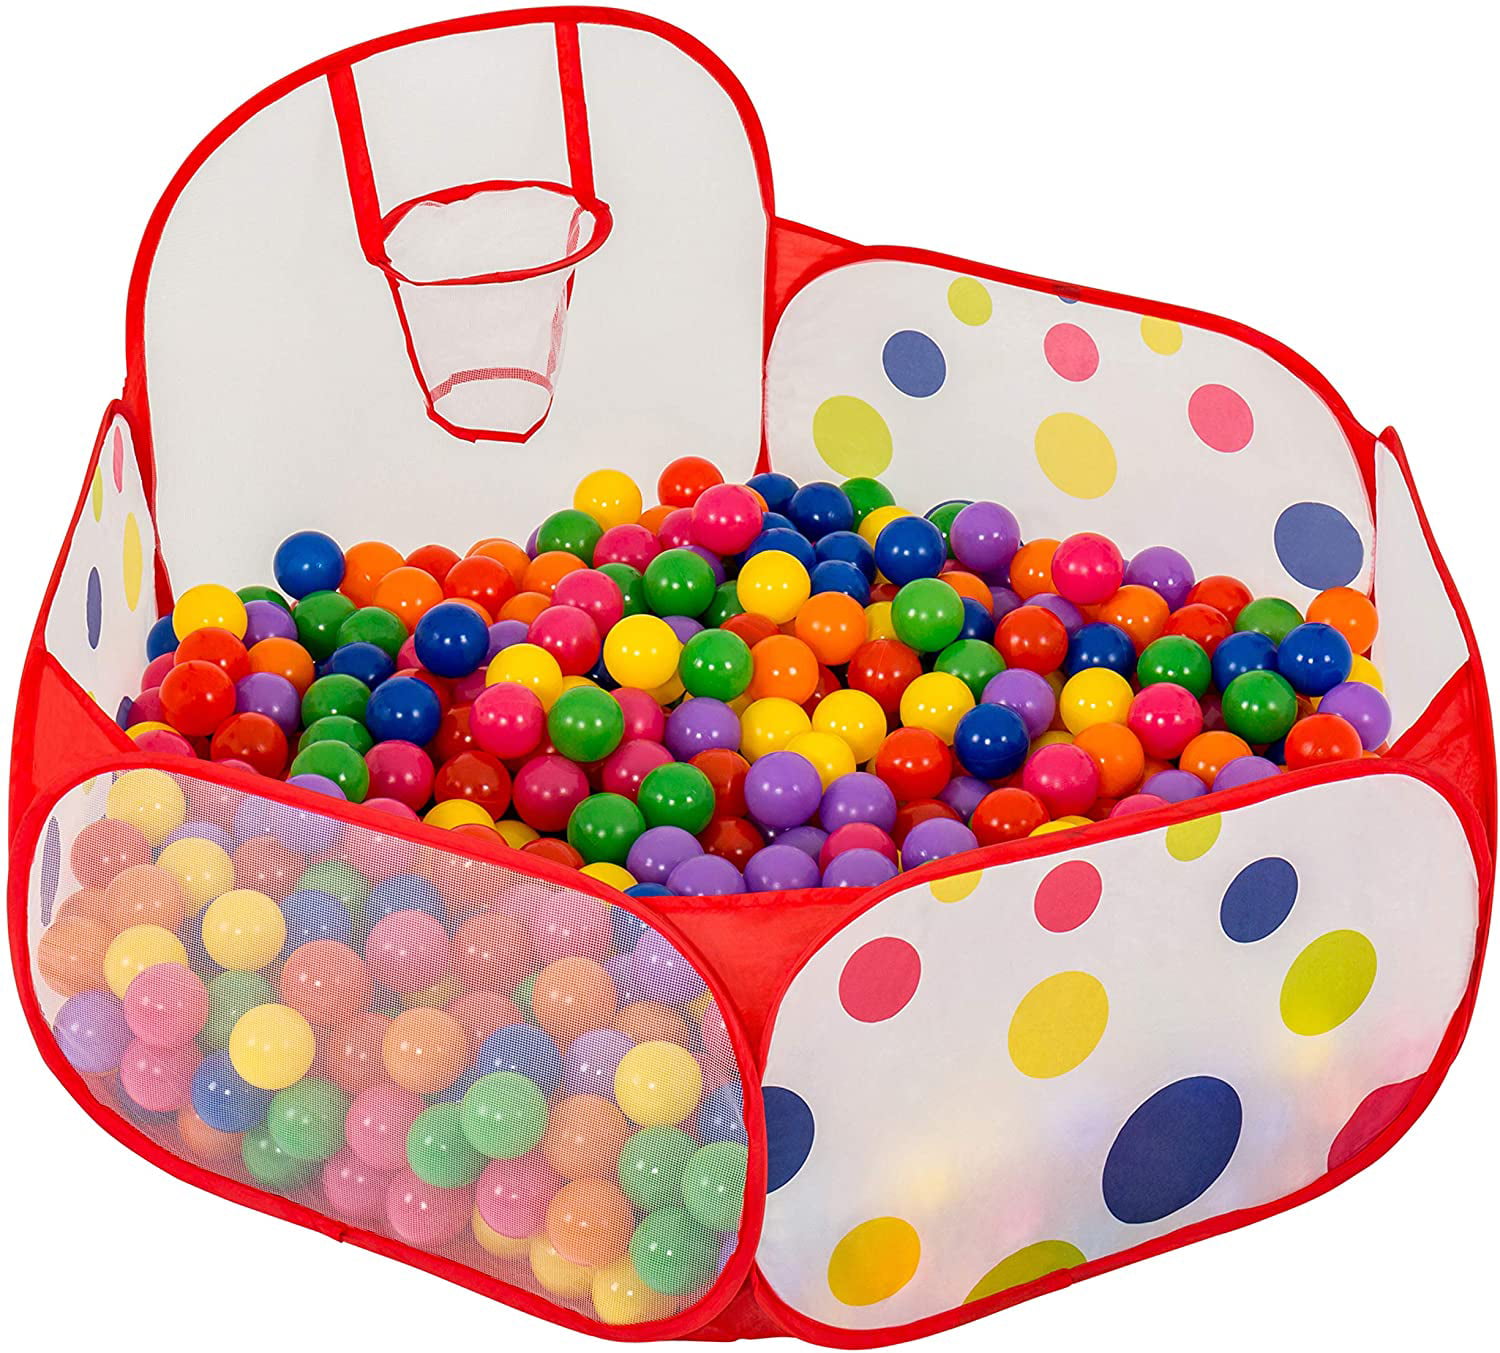 Portable Baby Playpen Outdoor Indoor Ball Pool Toddlers Play Tent Three Colors 